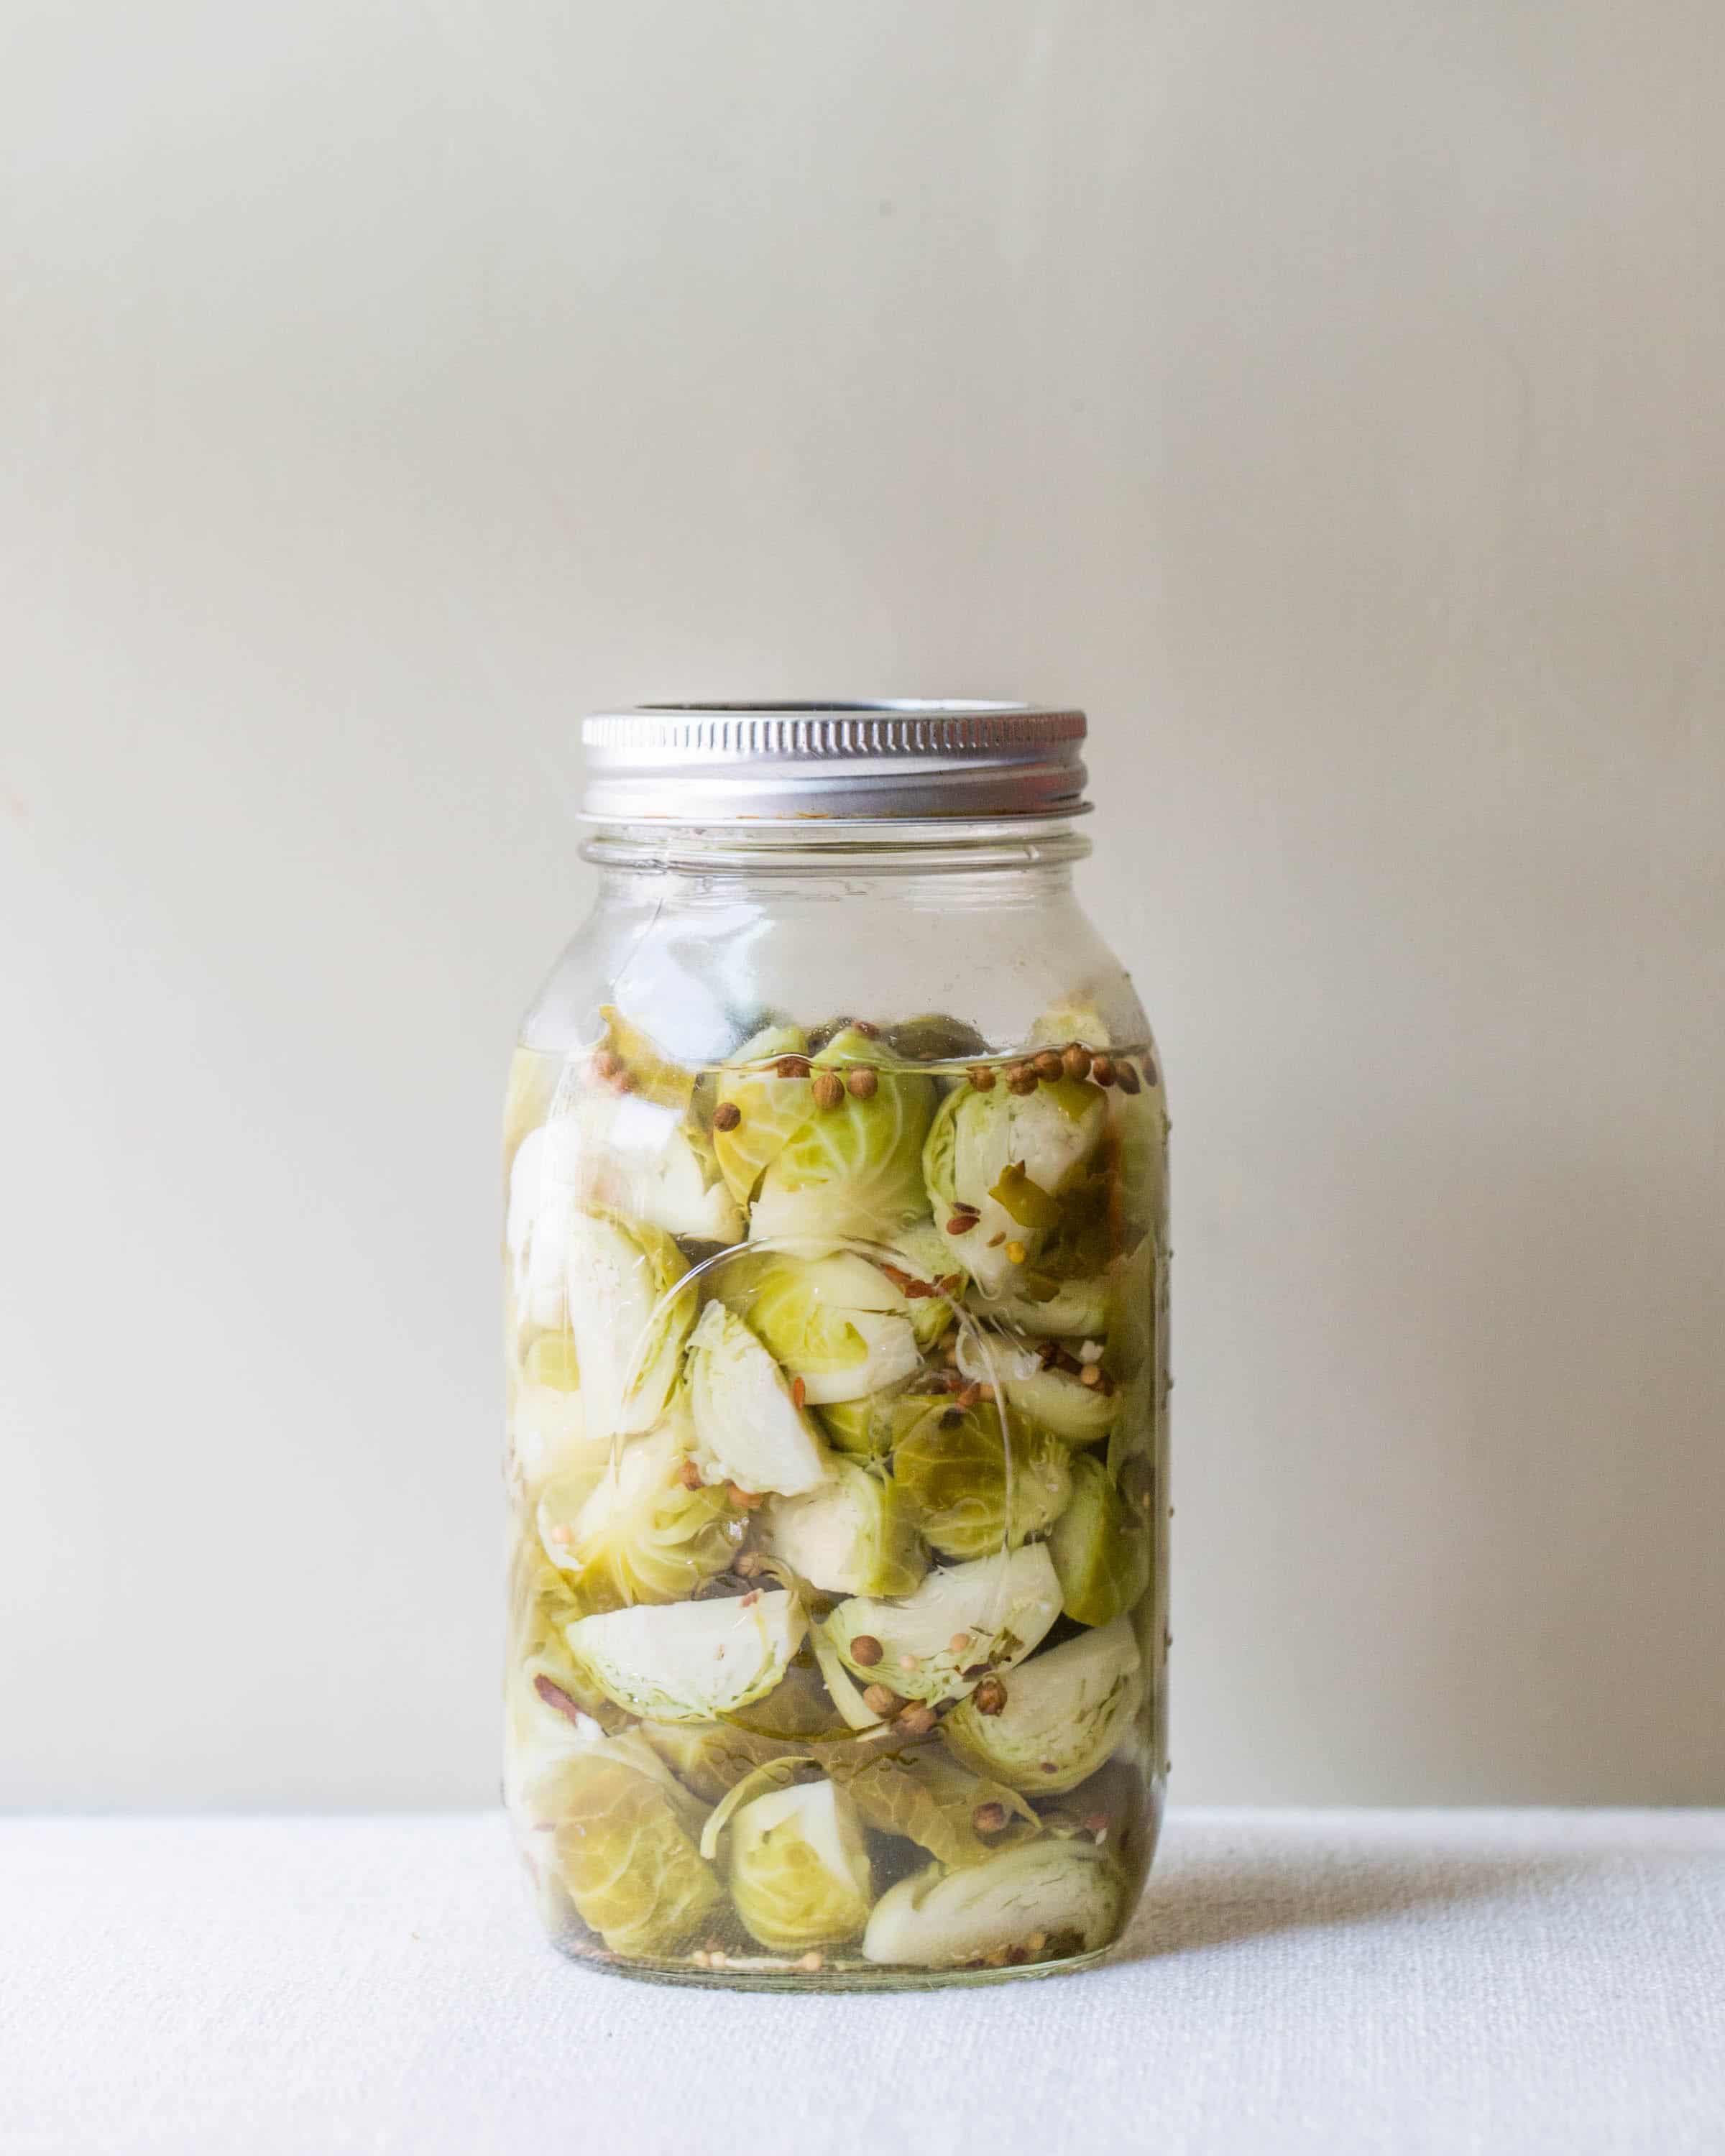 Pickled Brussels sprouts in a jar.